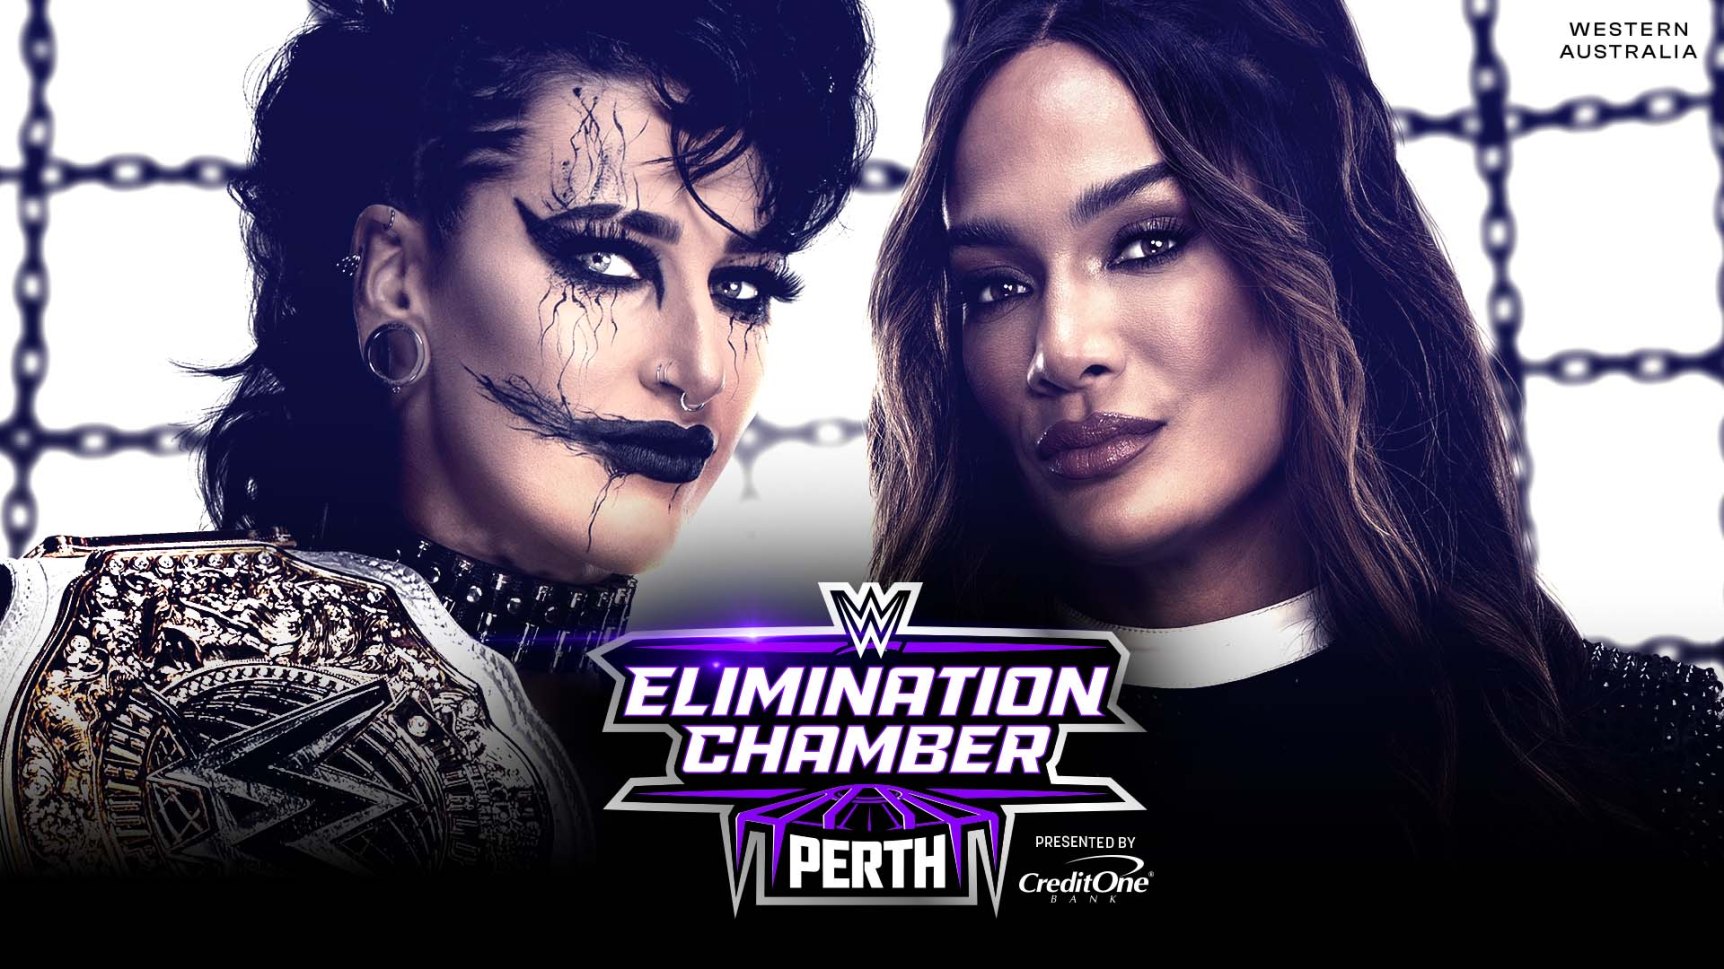 WWE Elimination Chamber Review: Two Chamber Matches, Women’s World Title Match